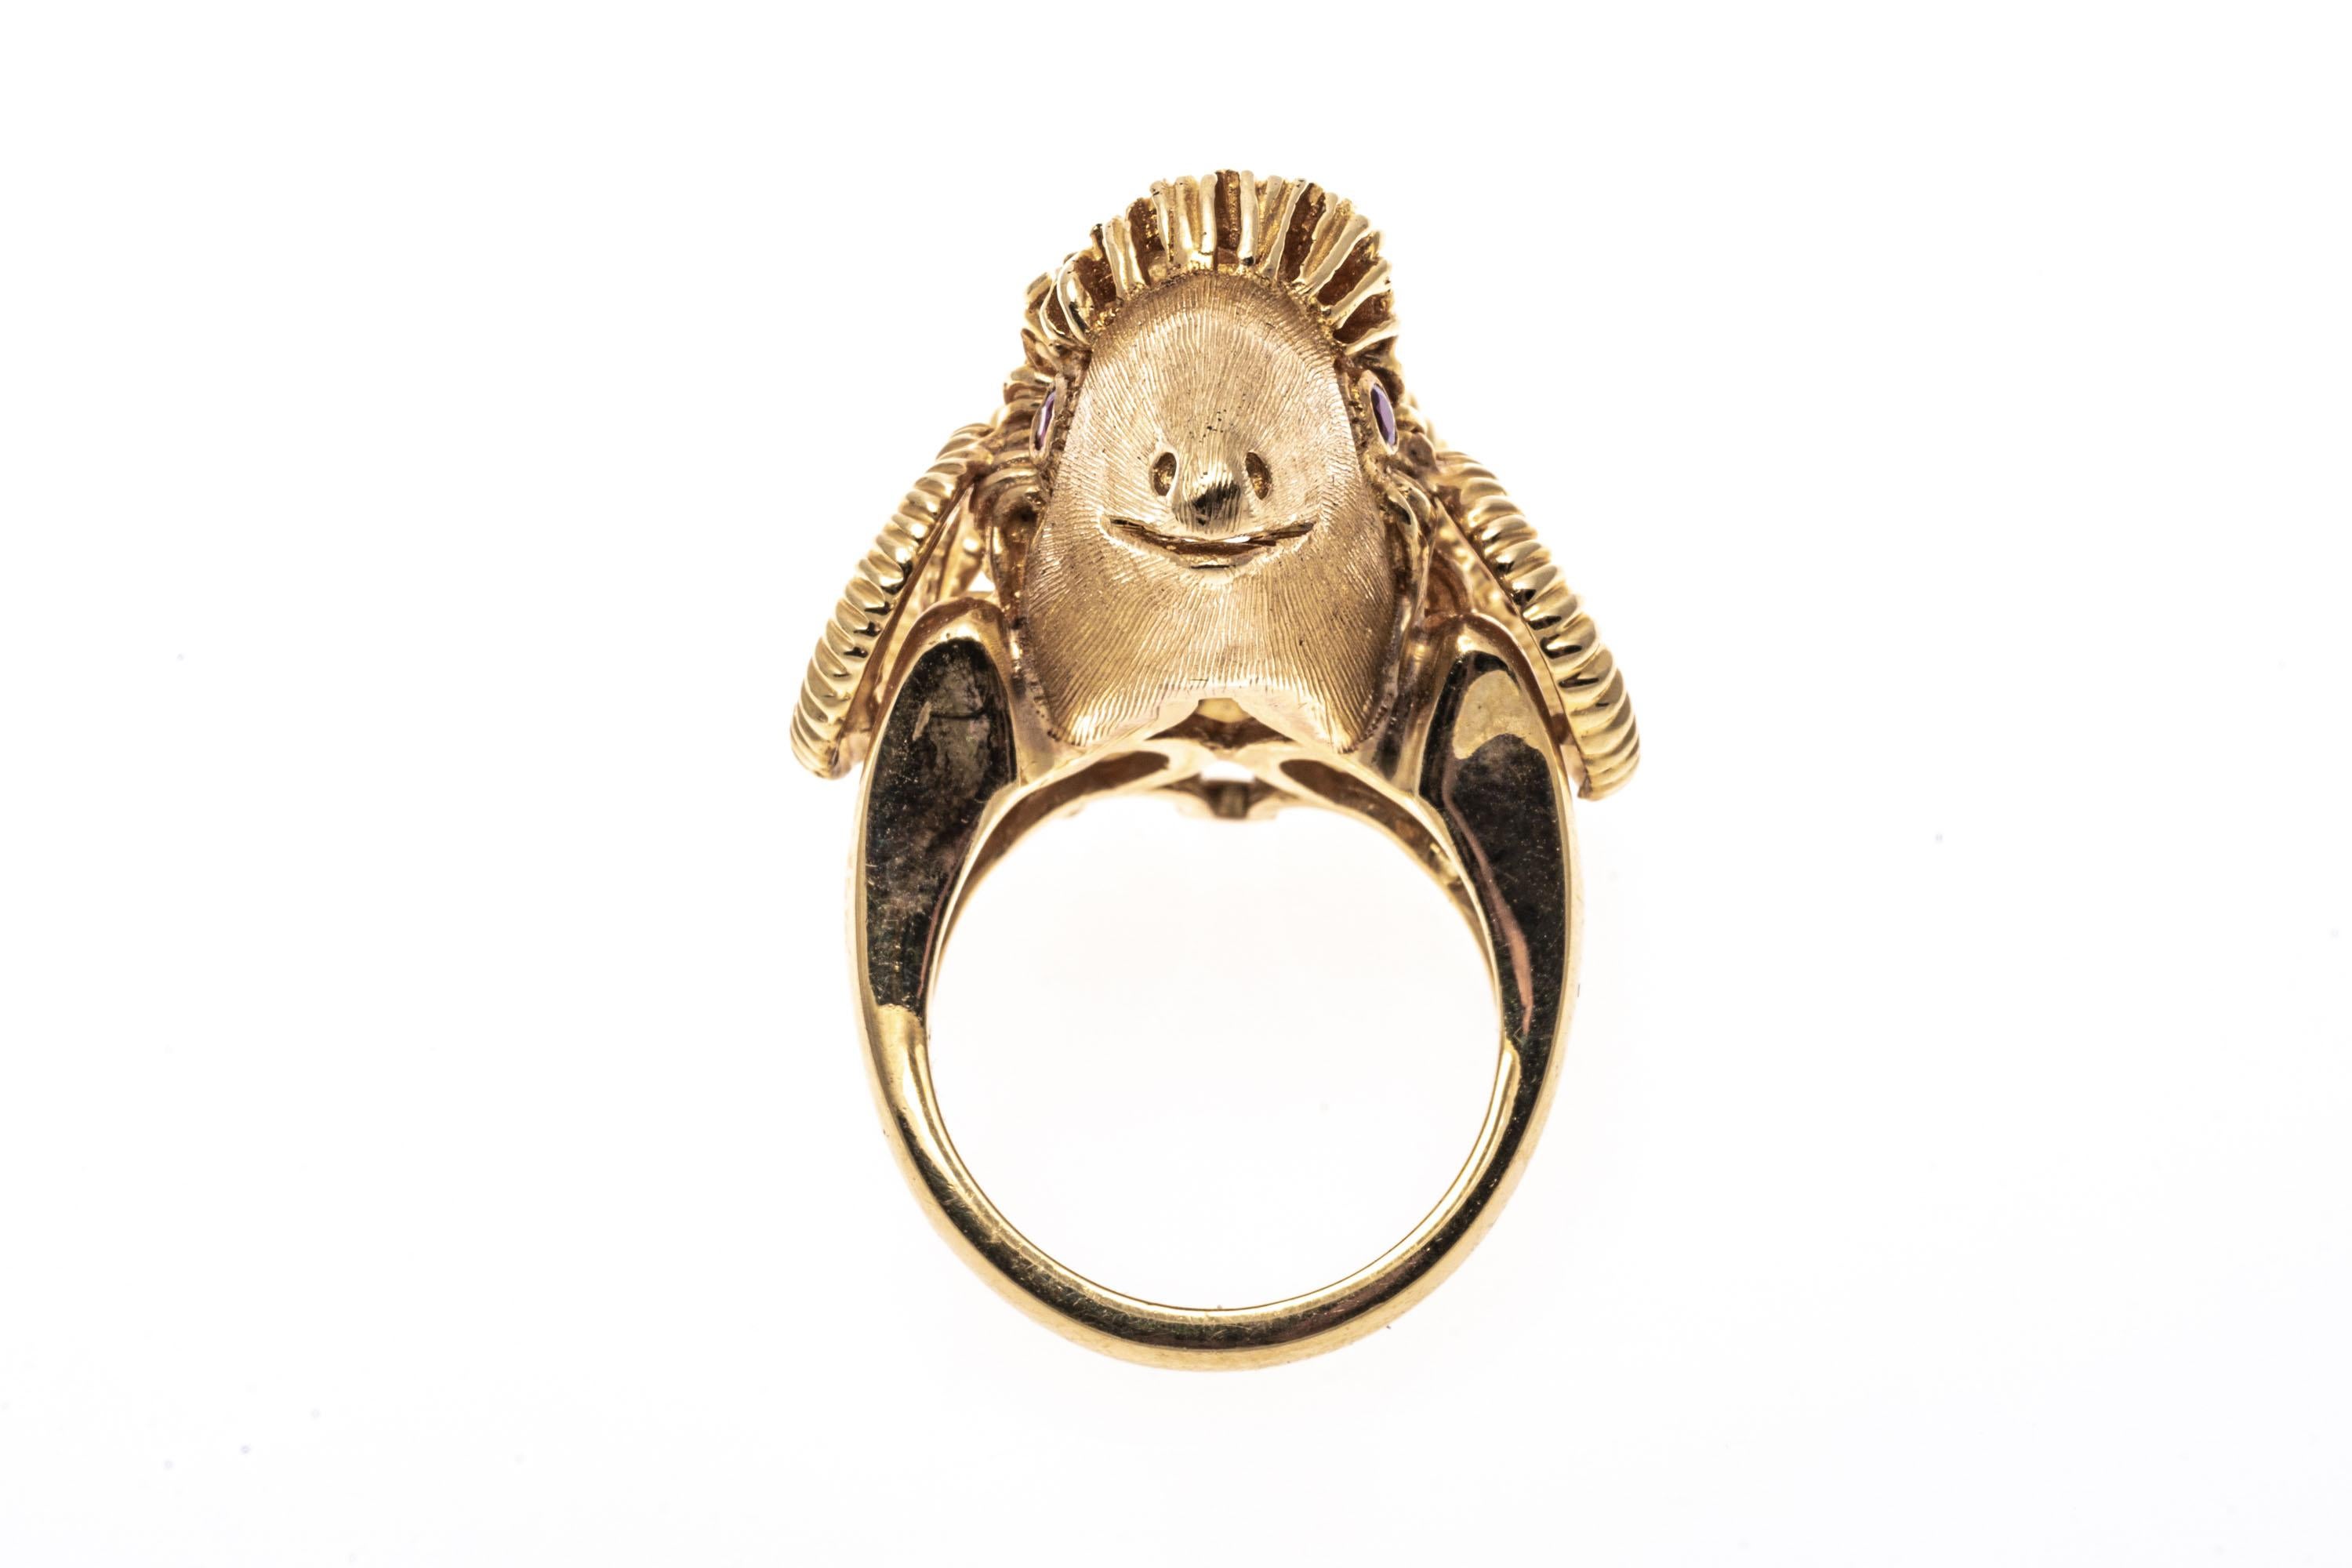 14k Yellow Gold Detailed Rams Head Ring With Ribbed Horns & Rubies
This imposing ring is a detailed figural ram's head, with ribbed, curved horns, a brushed face, and faceted ruby eyes.
Marks: 14k 
Dimensions: 7/8